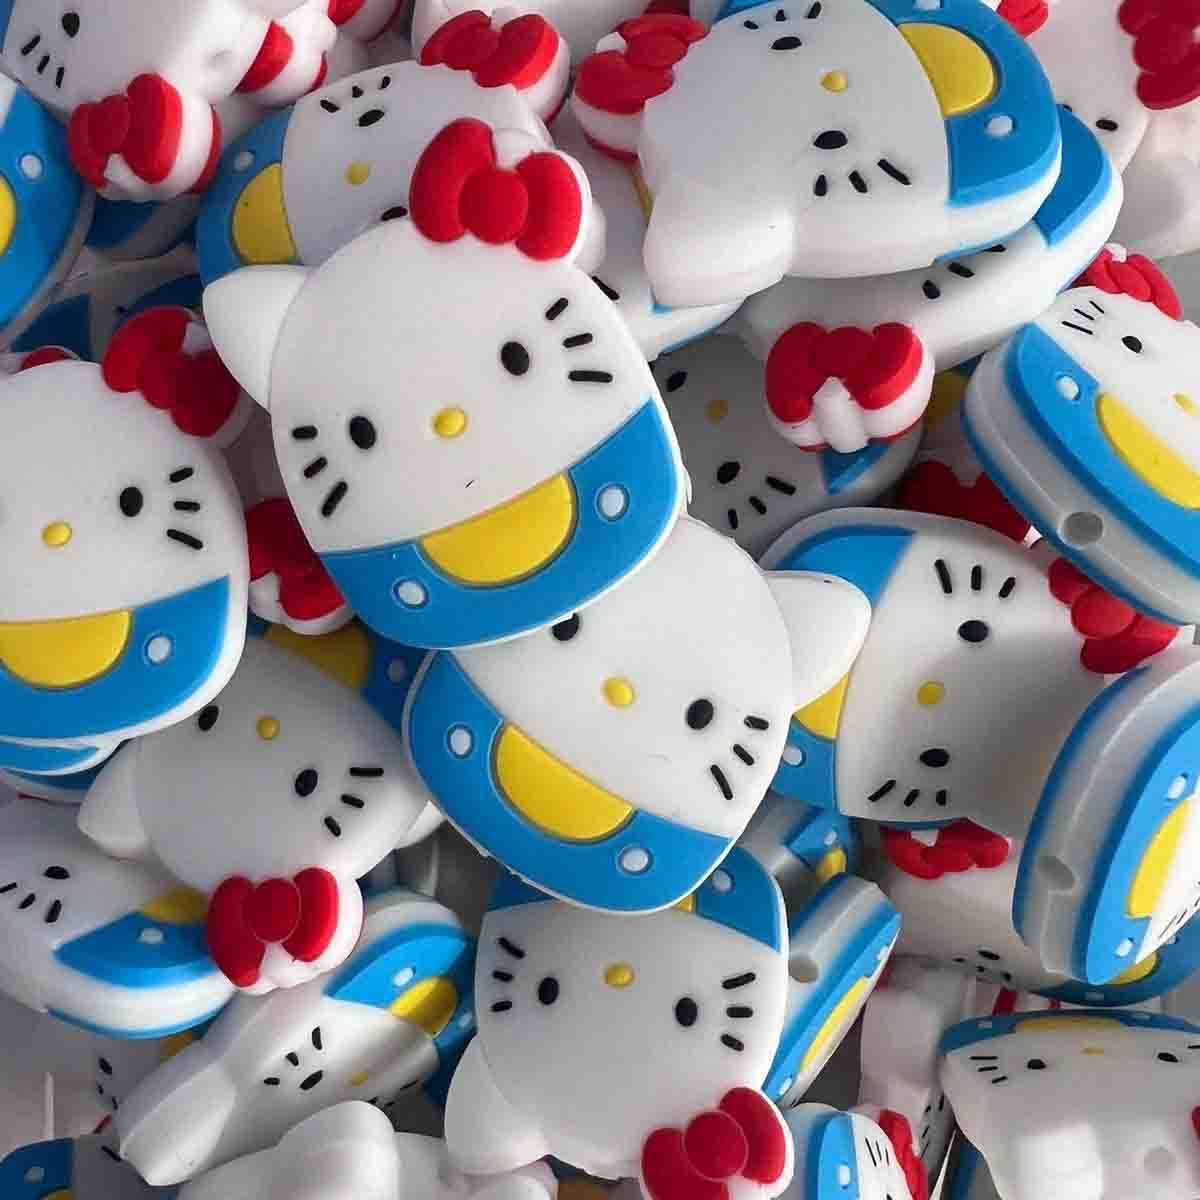 High-quality Silicone Hello Kitty Beads Set of 5, Stunning CRAFT SUPPLY